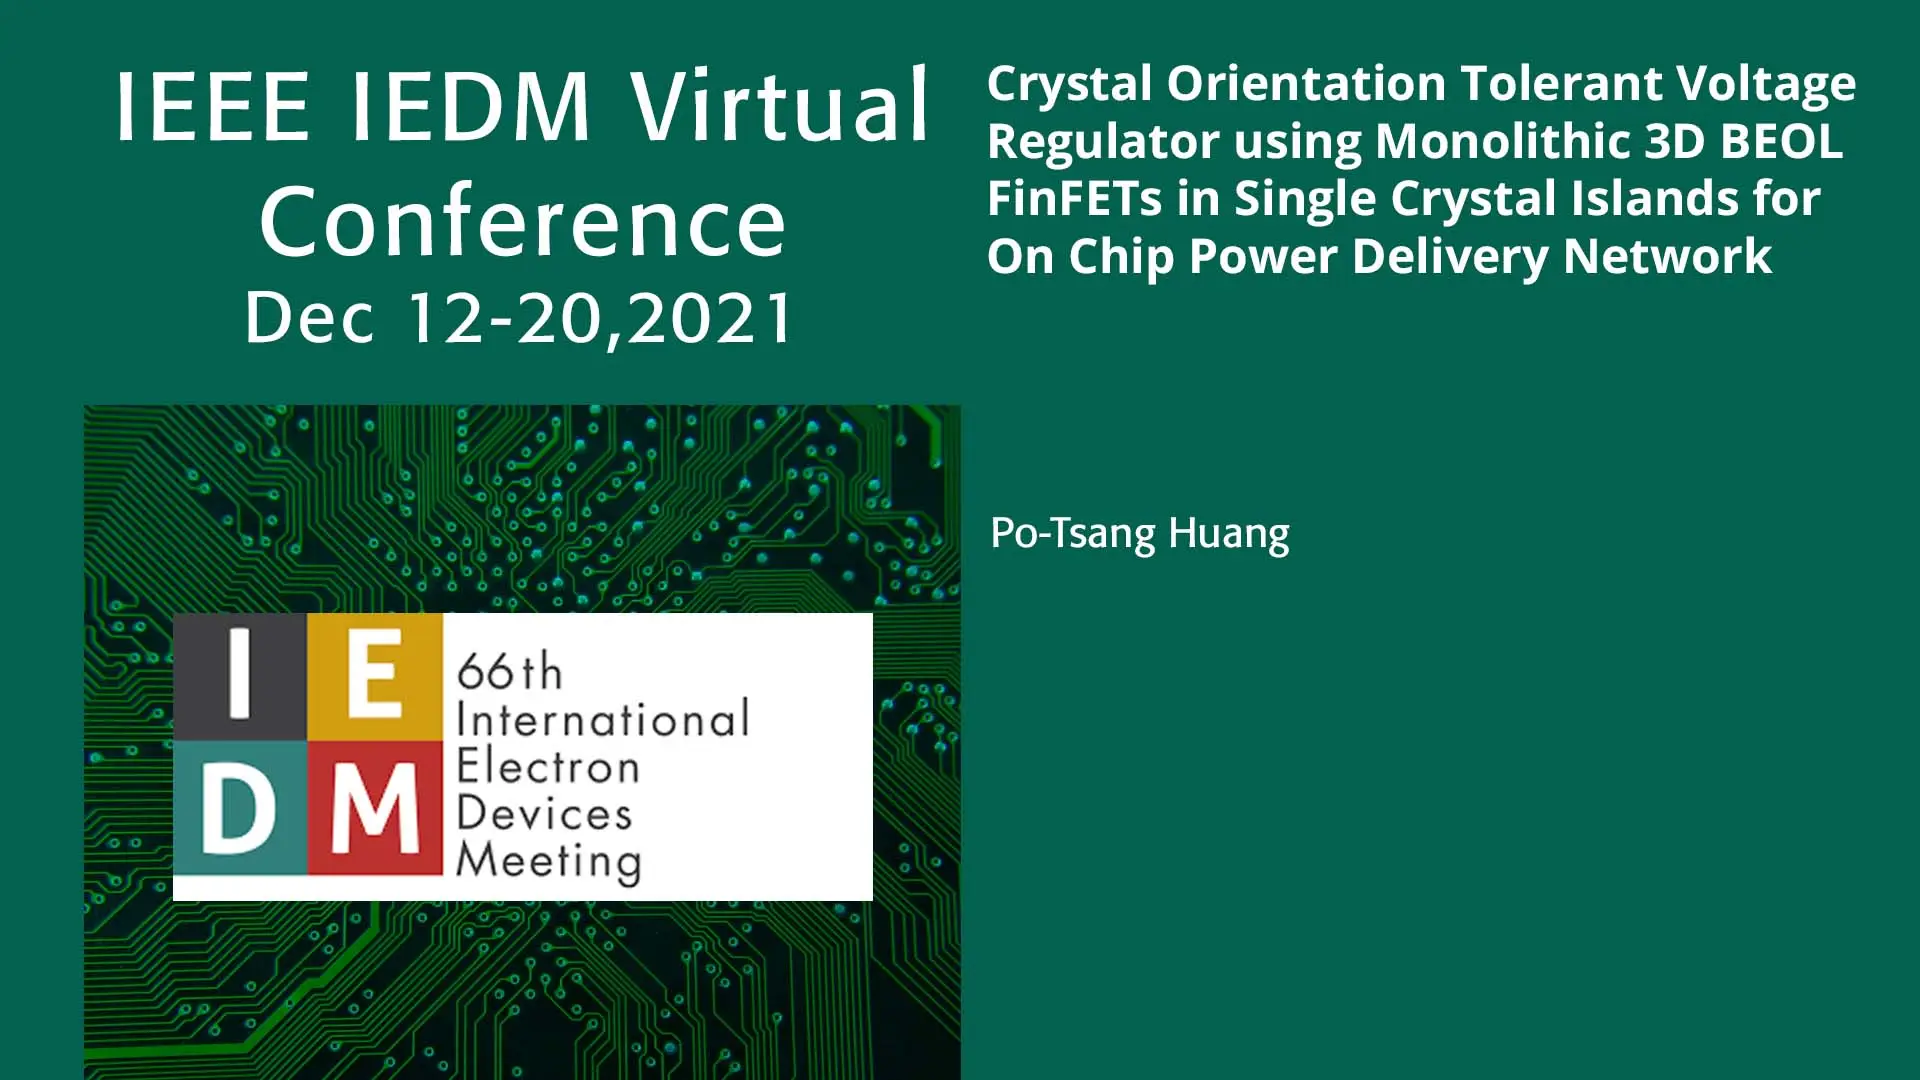 Crystal Orientation Tolerant Voltage Regulator using Monolithic 3D BEOL FinFETs in Single Crystal Islands for On Chip Power Delivery Network